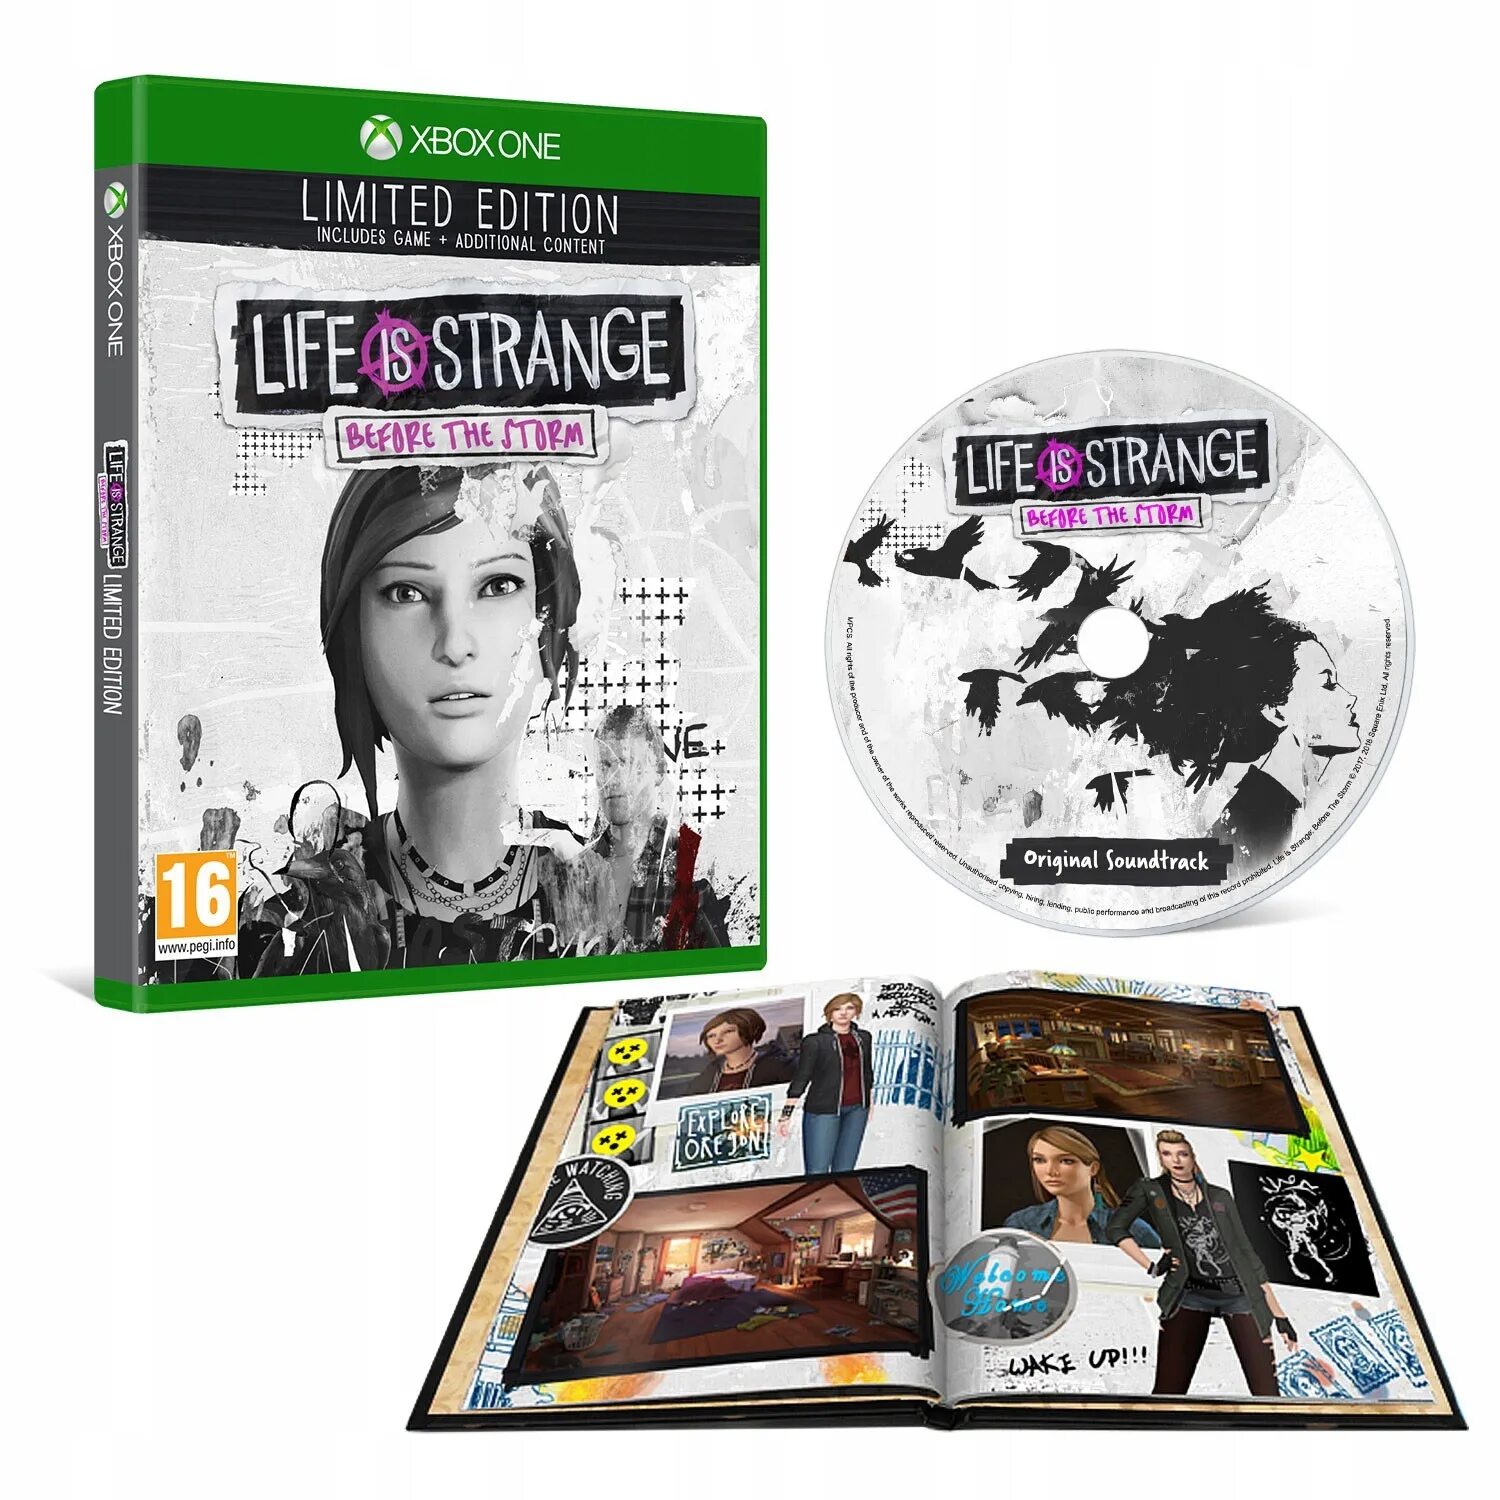 Life is Strange Limited Edition. Life is Strange before the Storm Limited Edition. Life is Strange before the Storm Xbox one. Life is Strange Xbox 360.